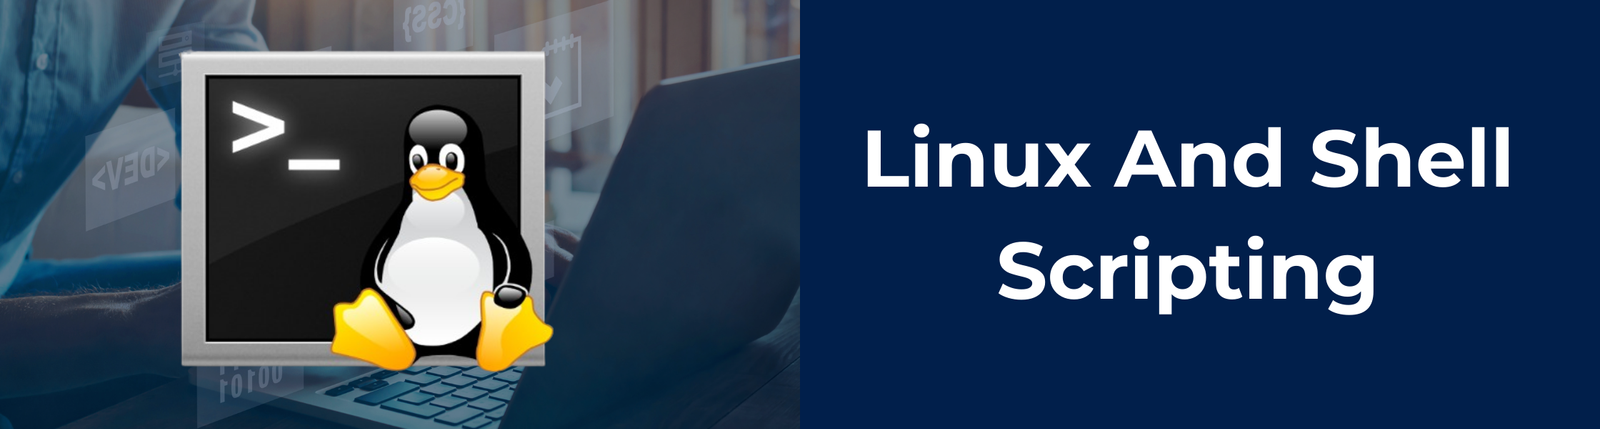 Linux and Shell Scripting Certified Course